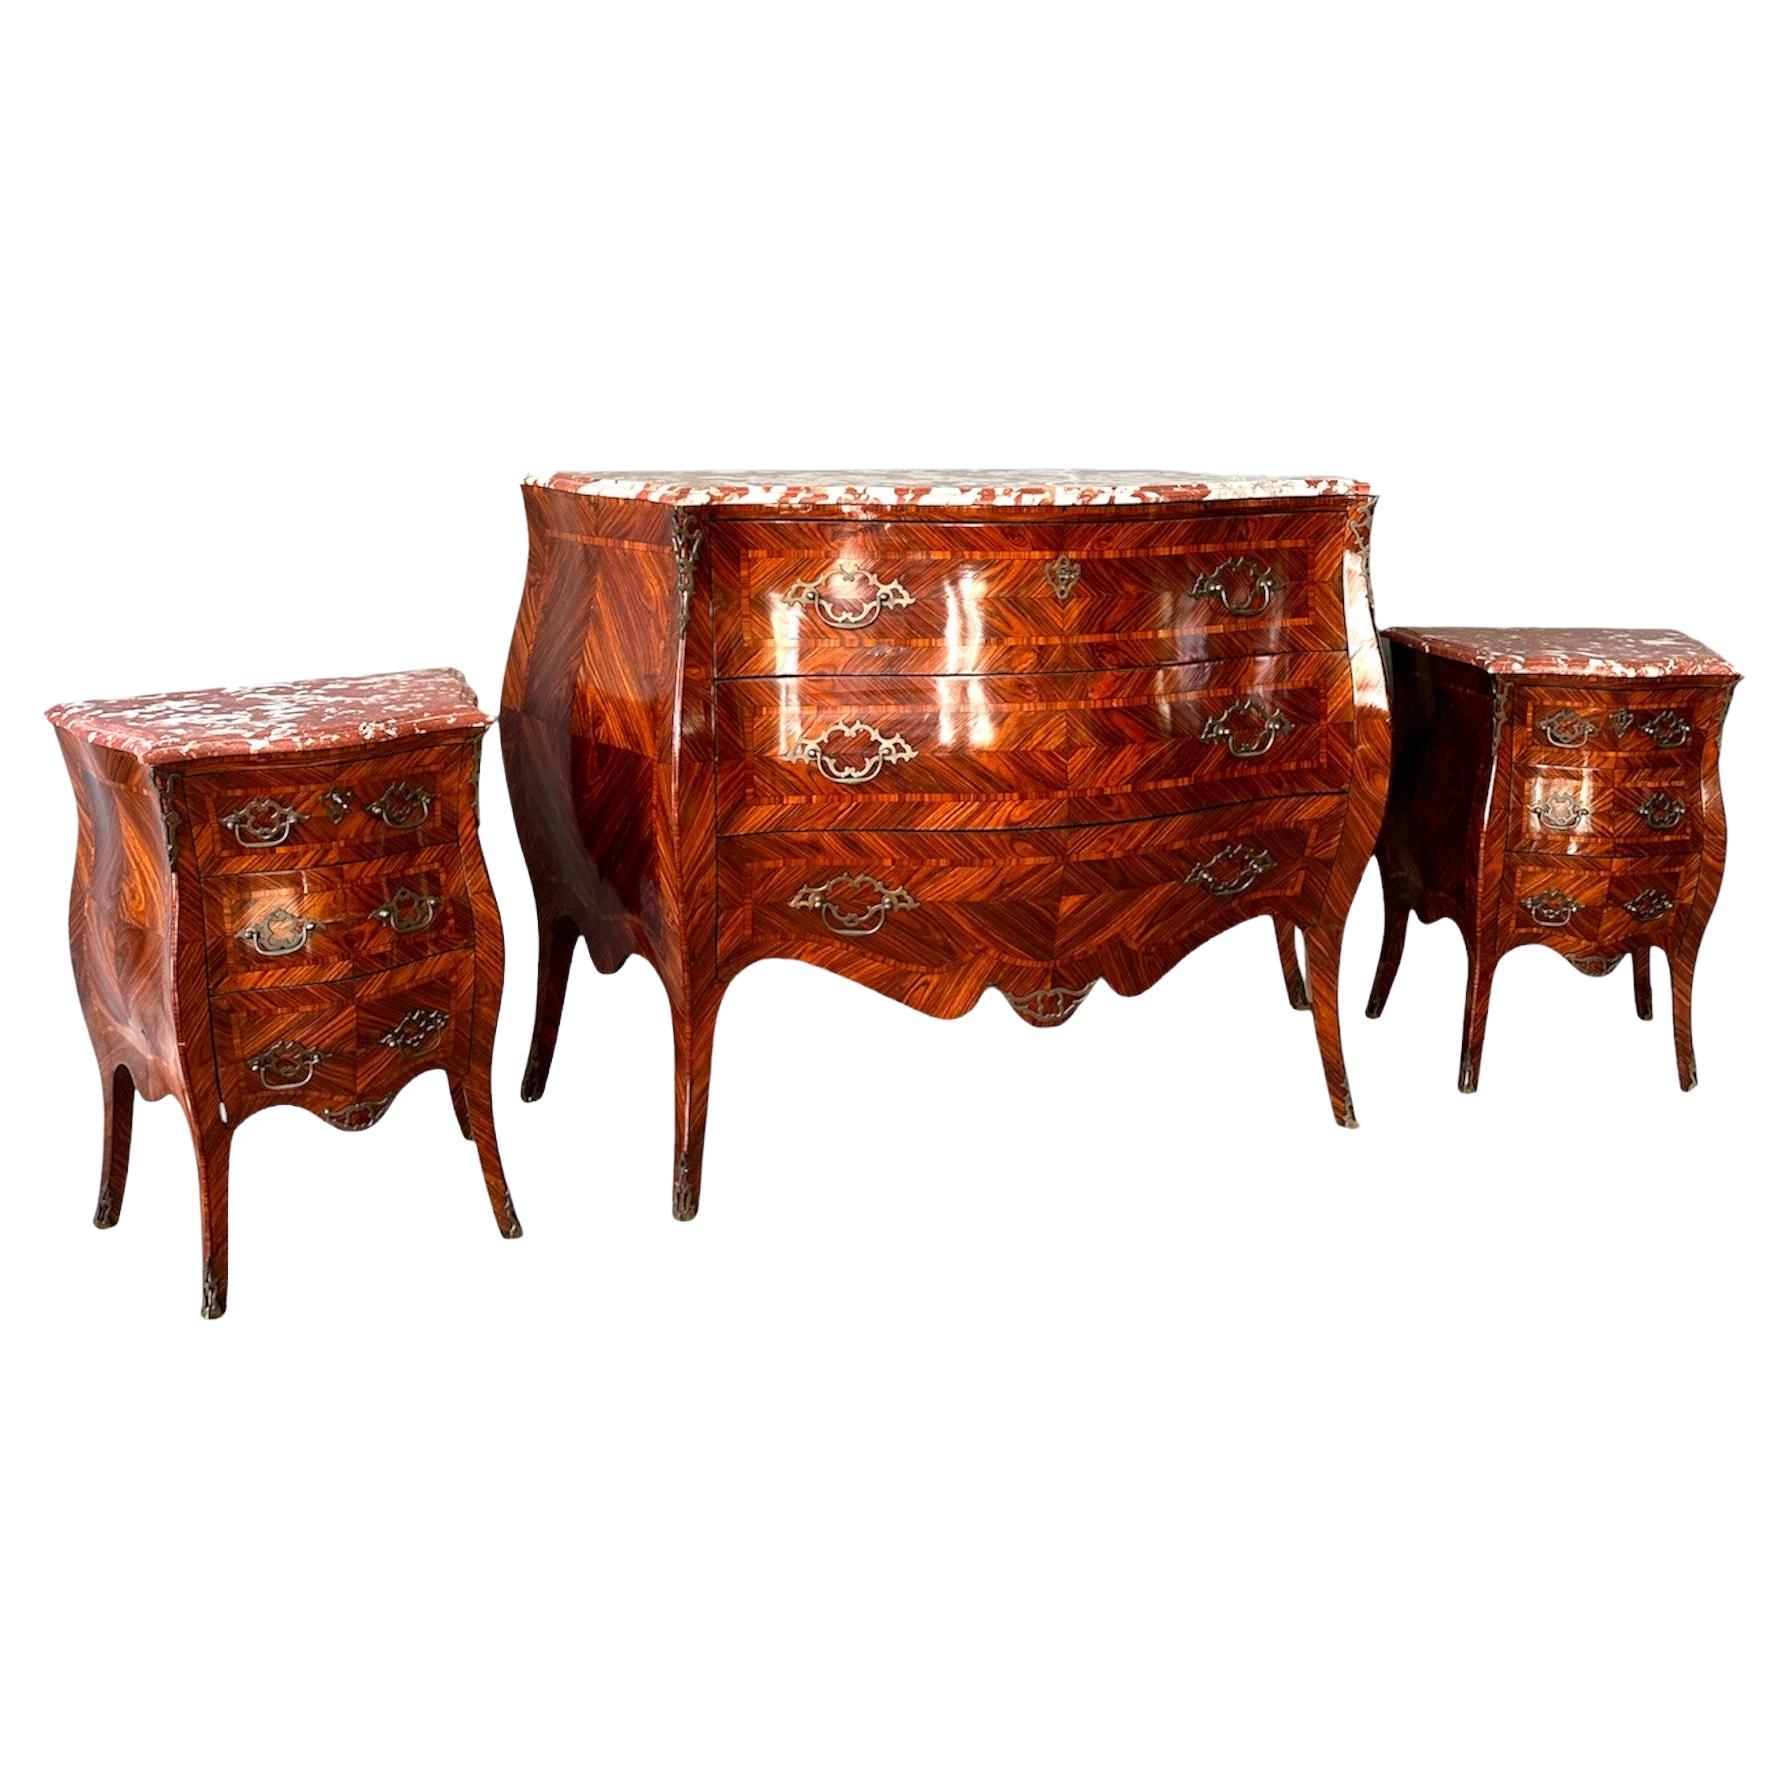 19th century, Napoleon III, Dresser and two nightstands in ebony and marble For Sale